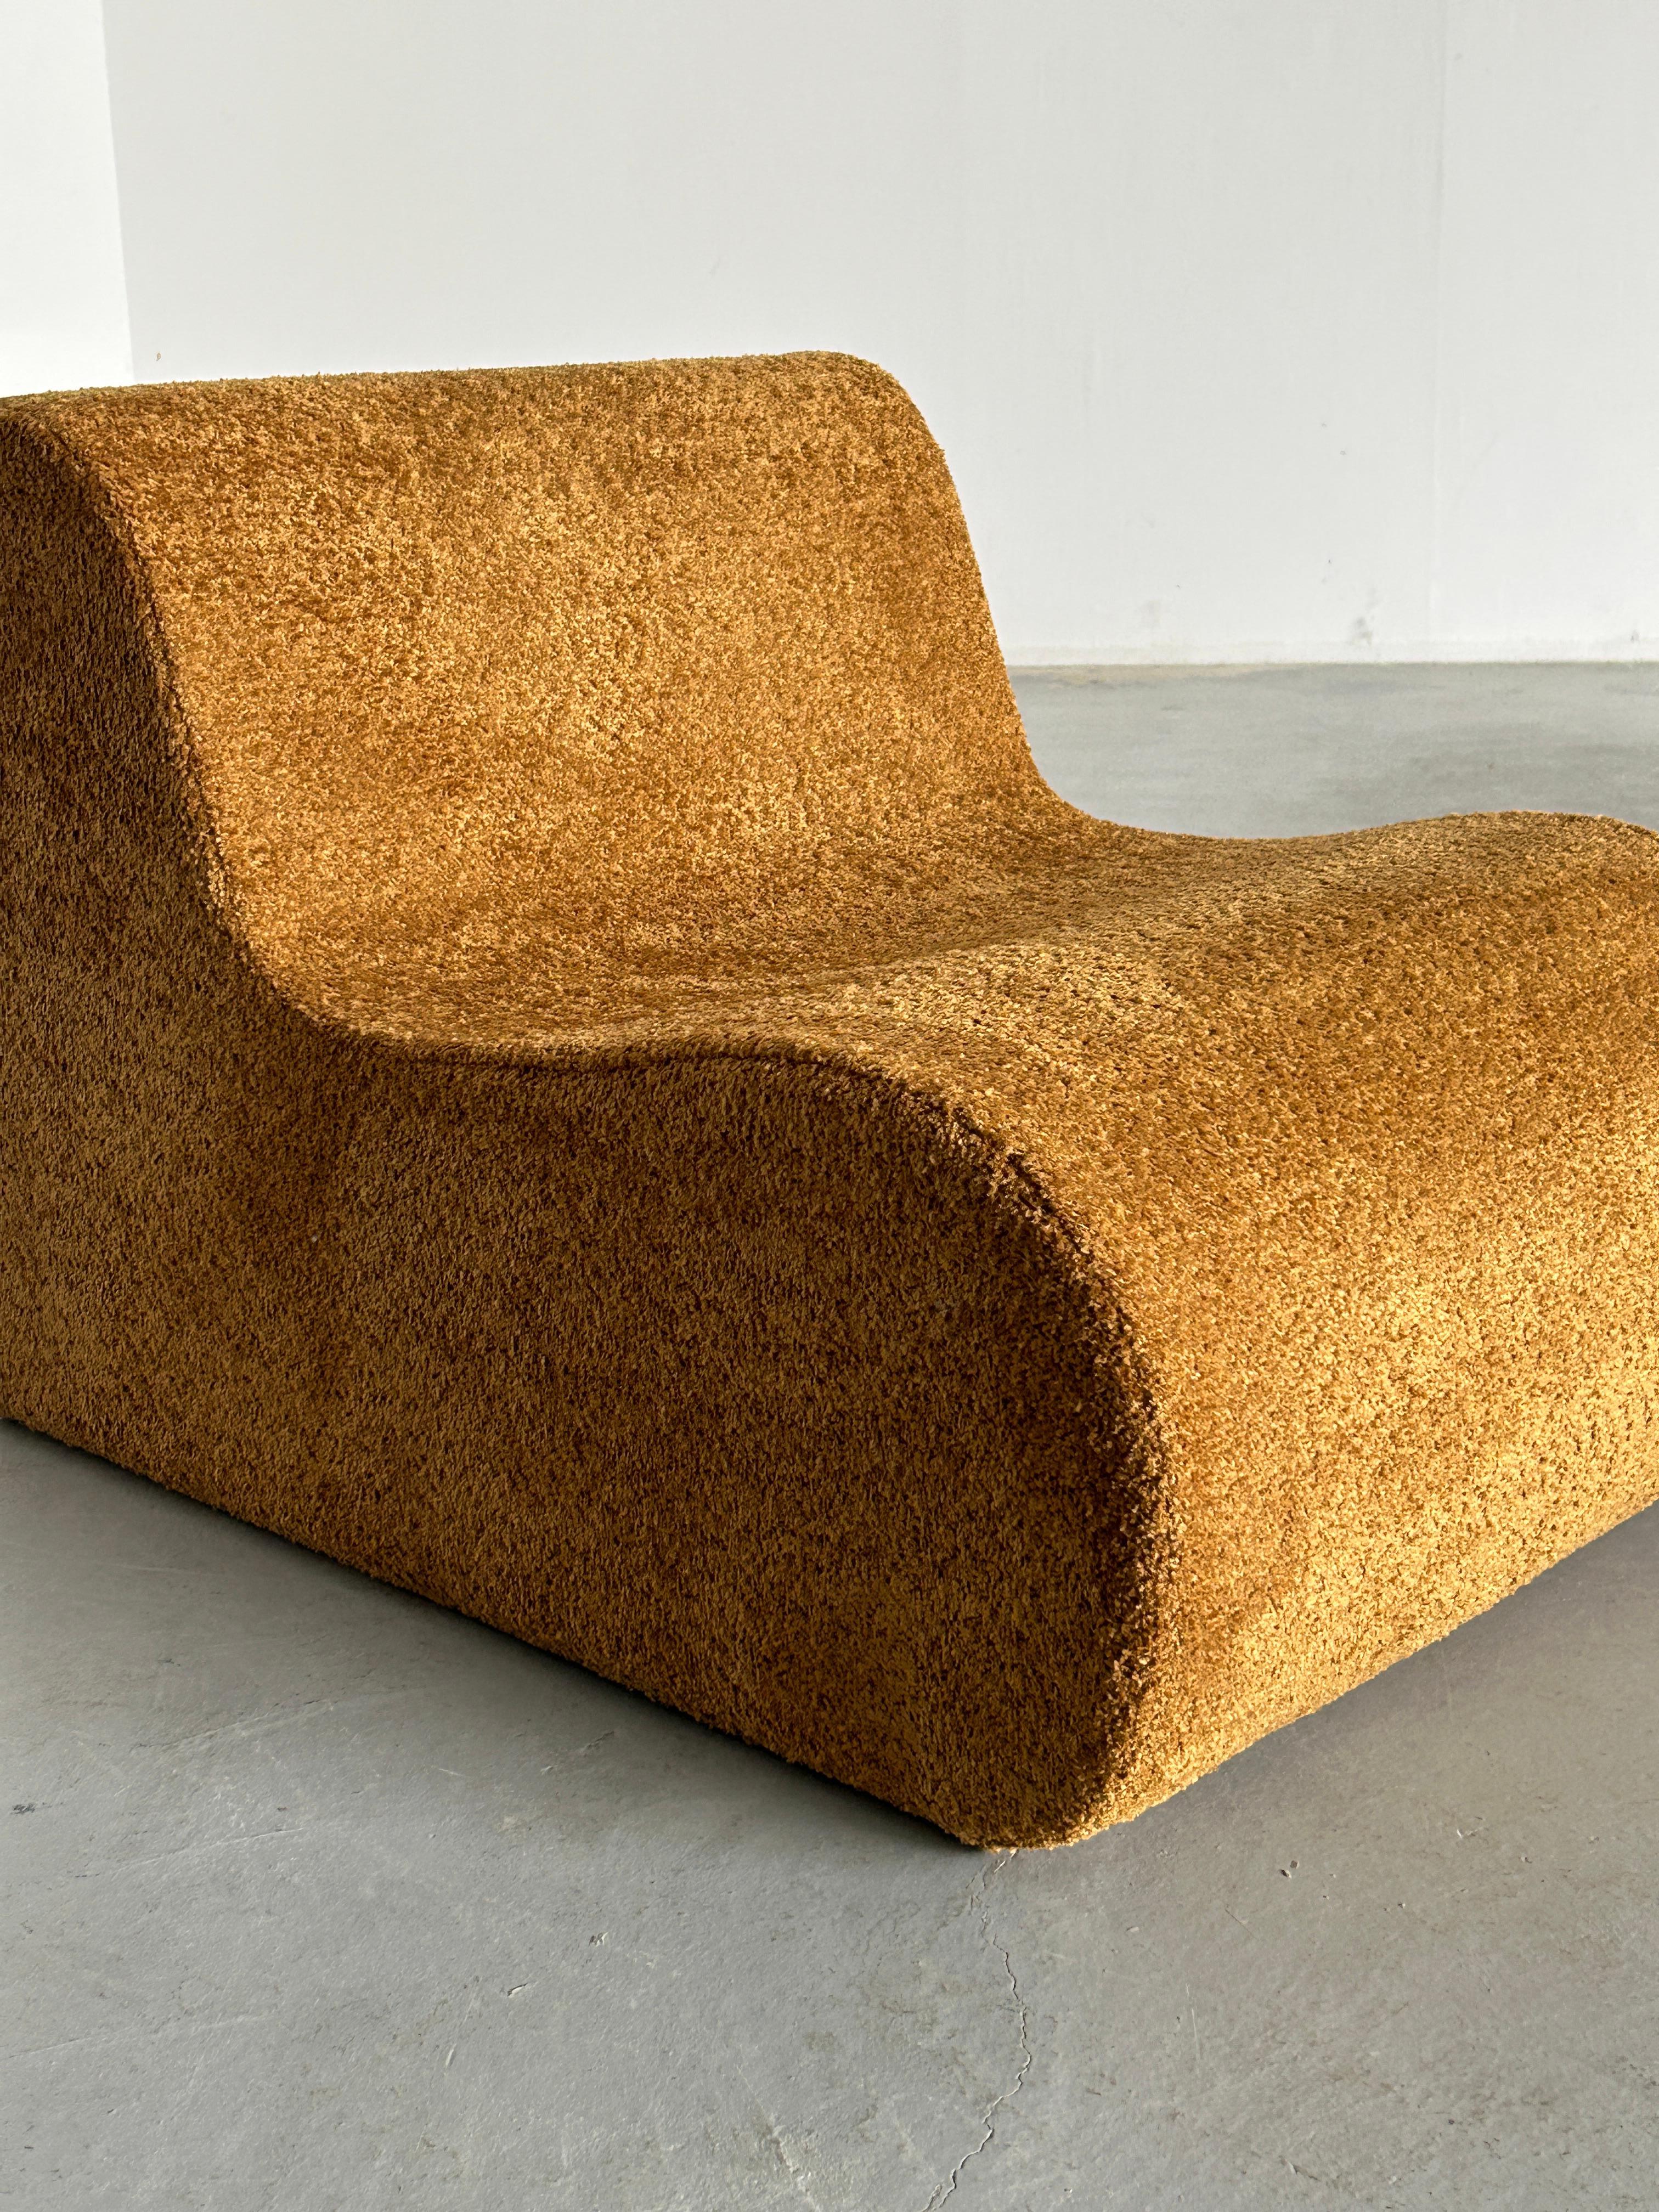 Vintage Italian Mid-Century-Modern Lounge Chair in Ochre Boucle, 1970s Italy For Sale 6